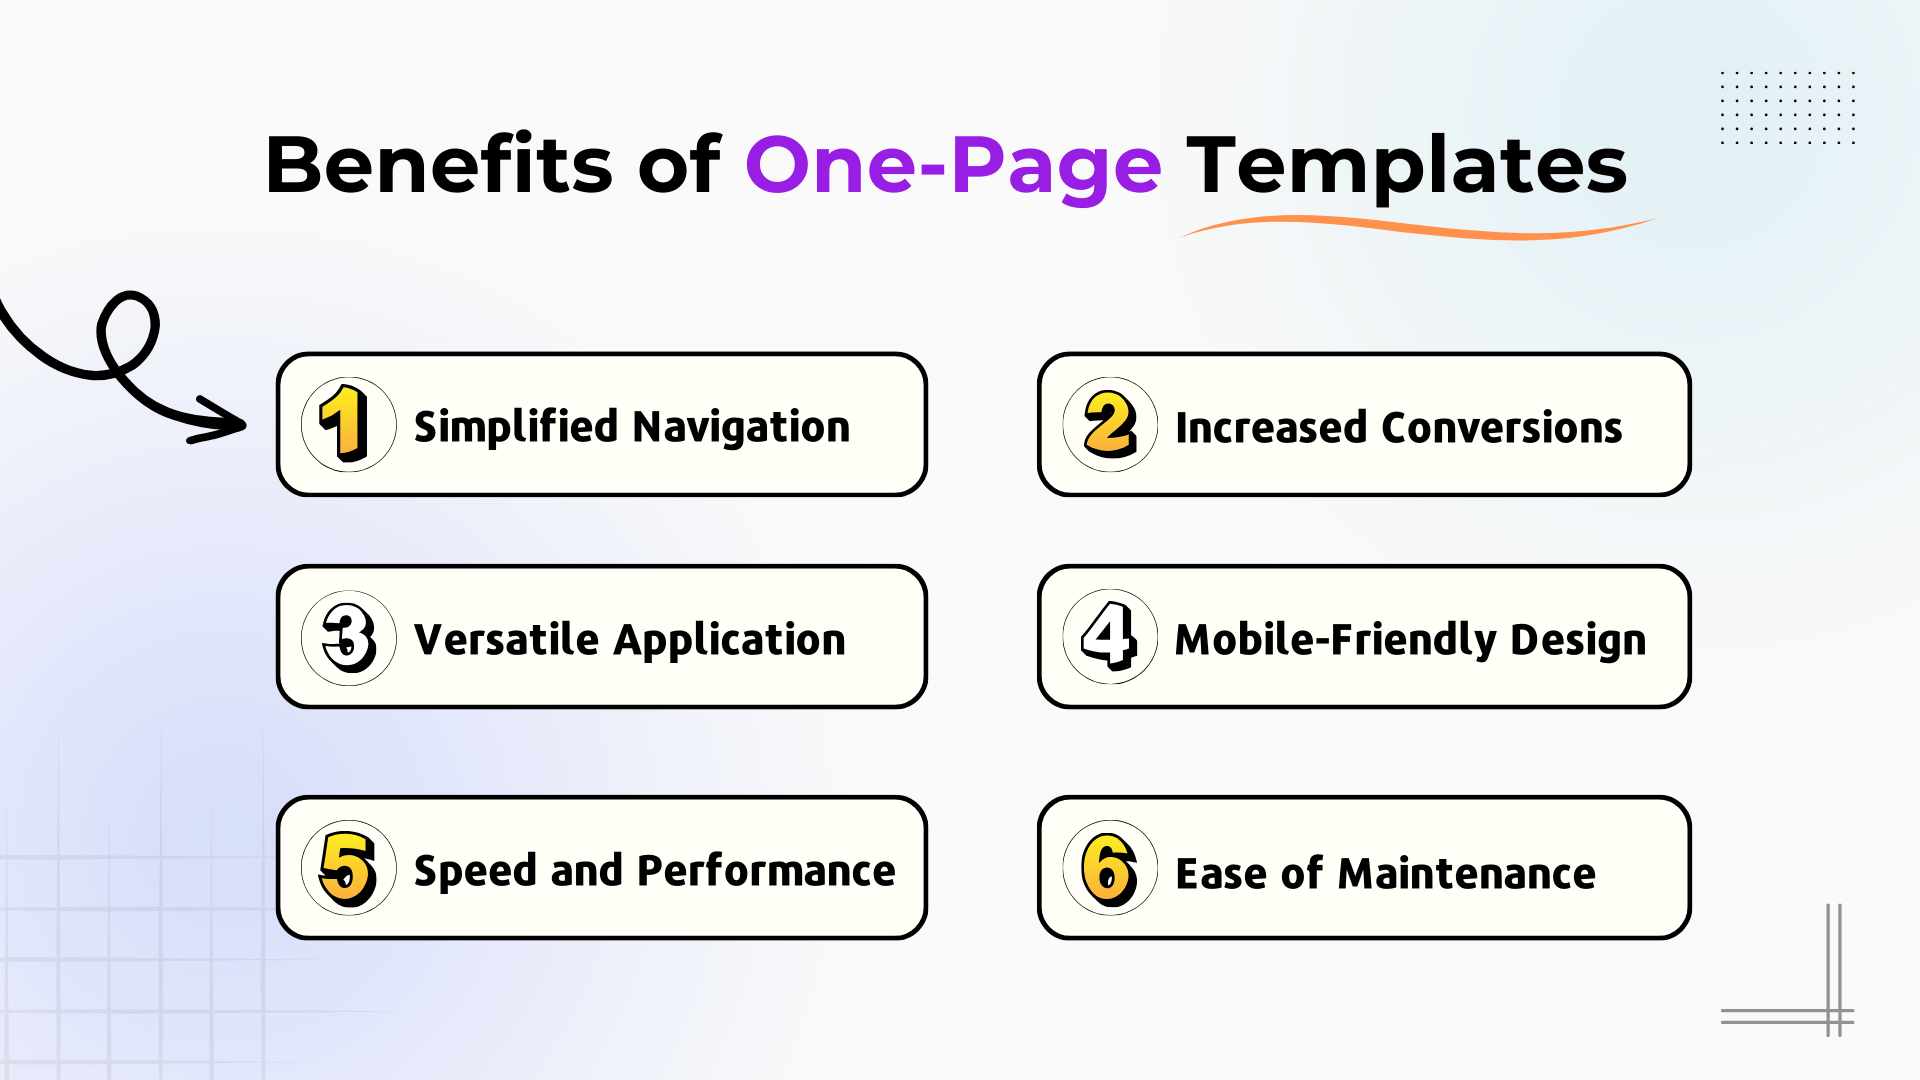 Benefits of One-Page Templates